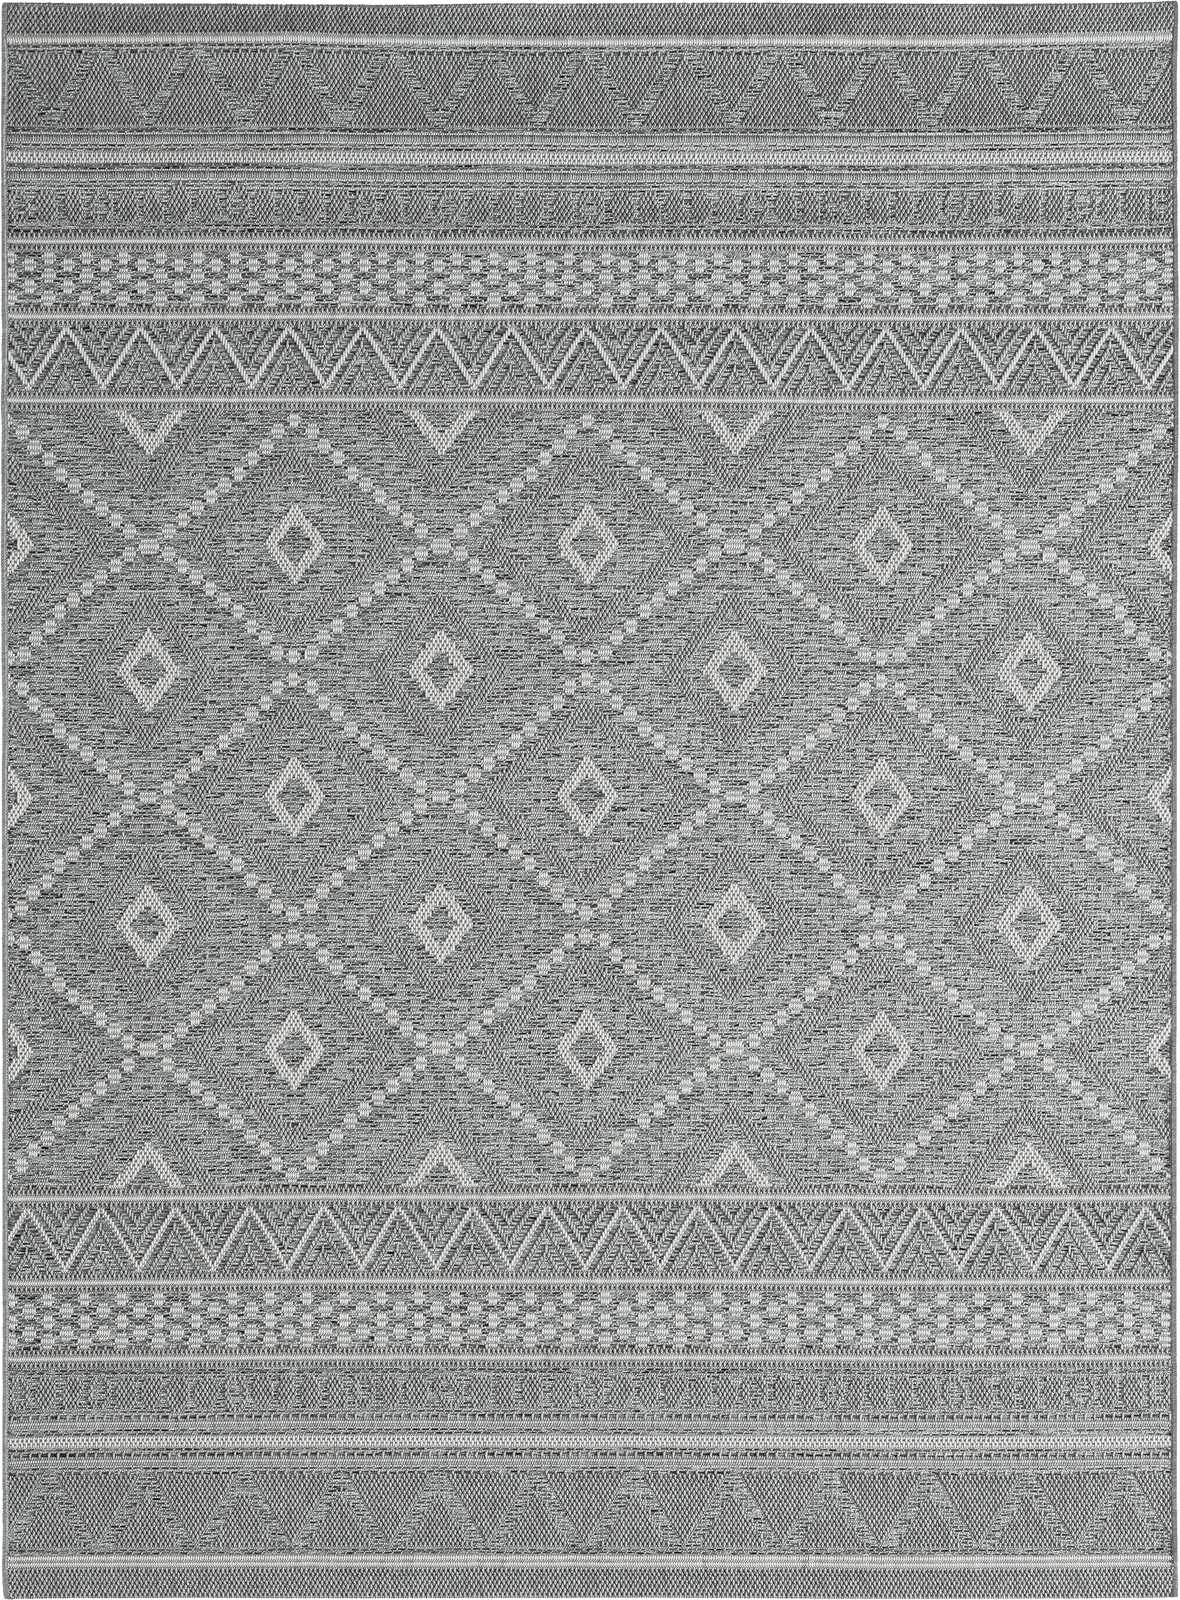             Patterned Outdoor Rug in Grey - 150 x 80 cm
        